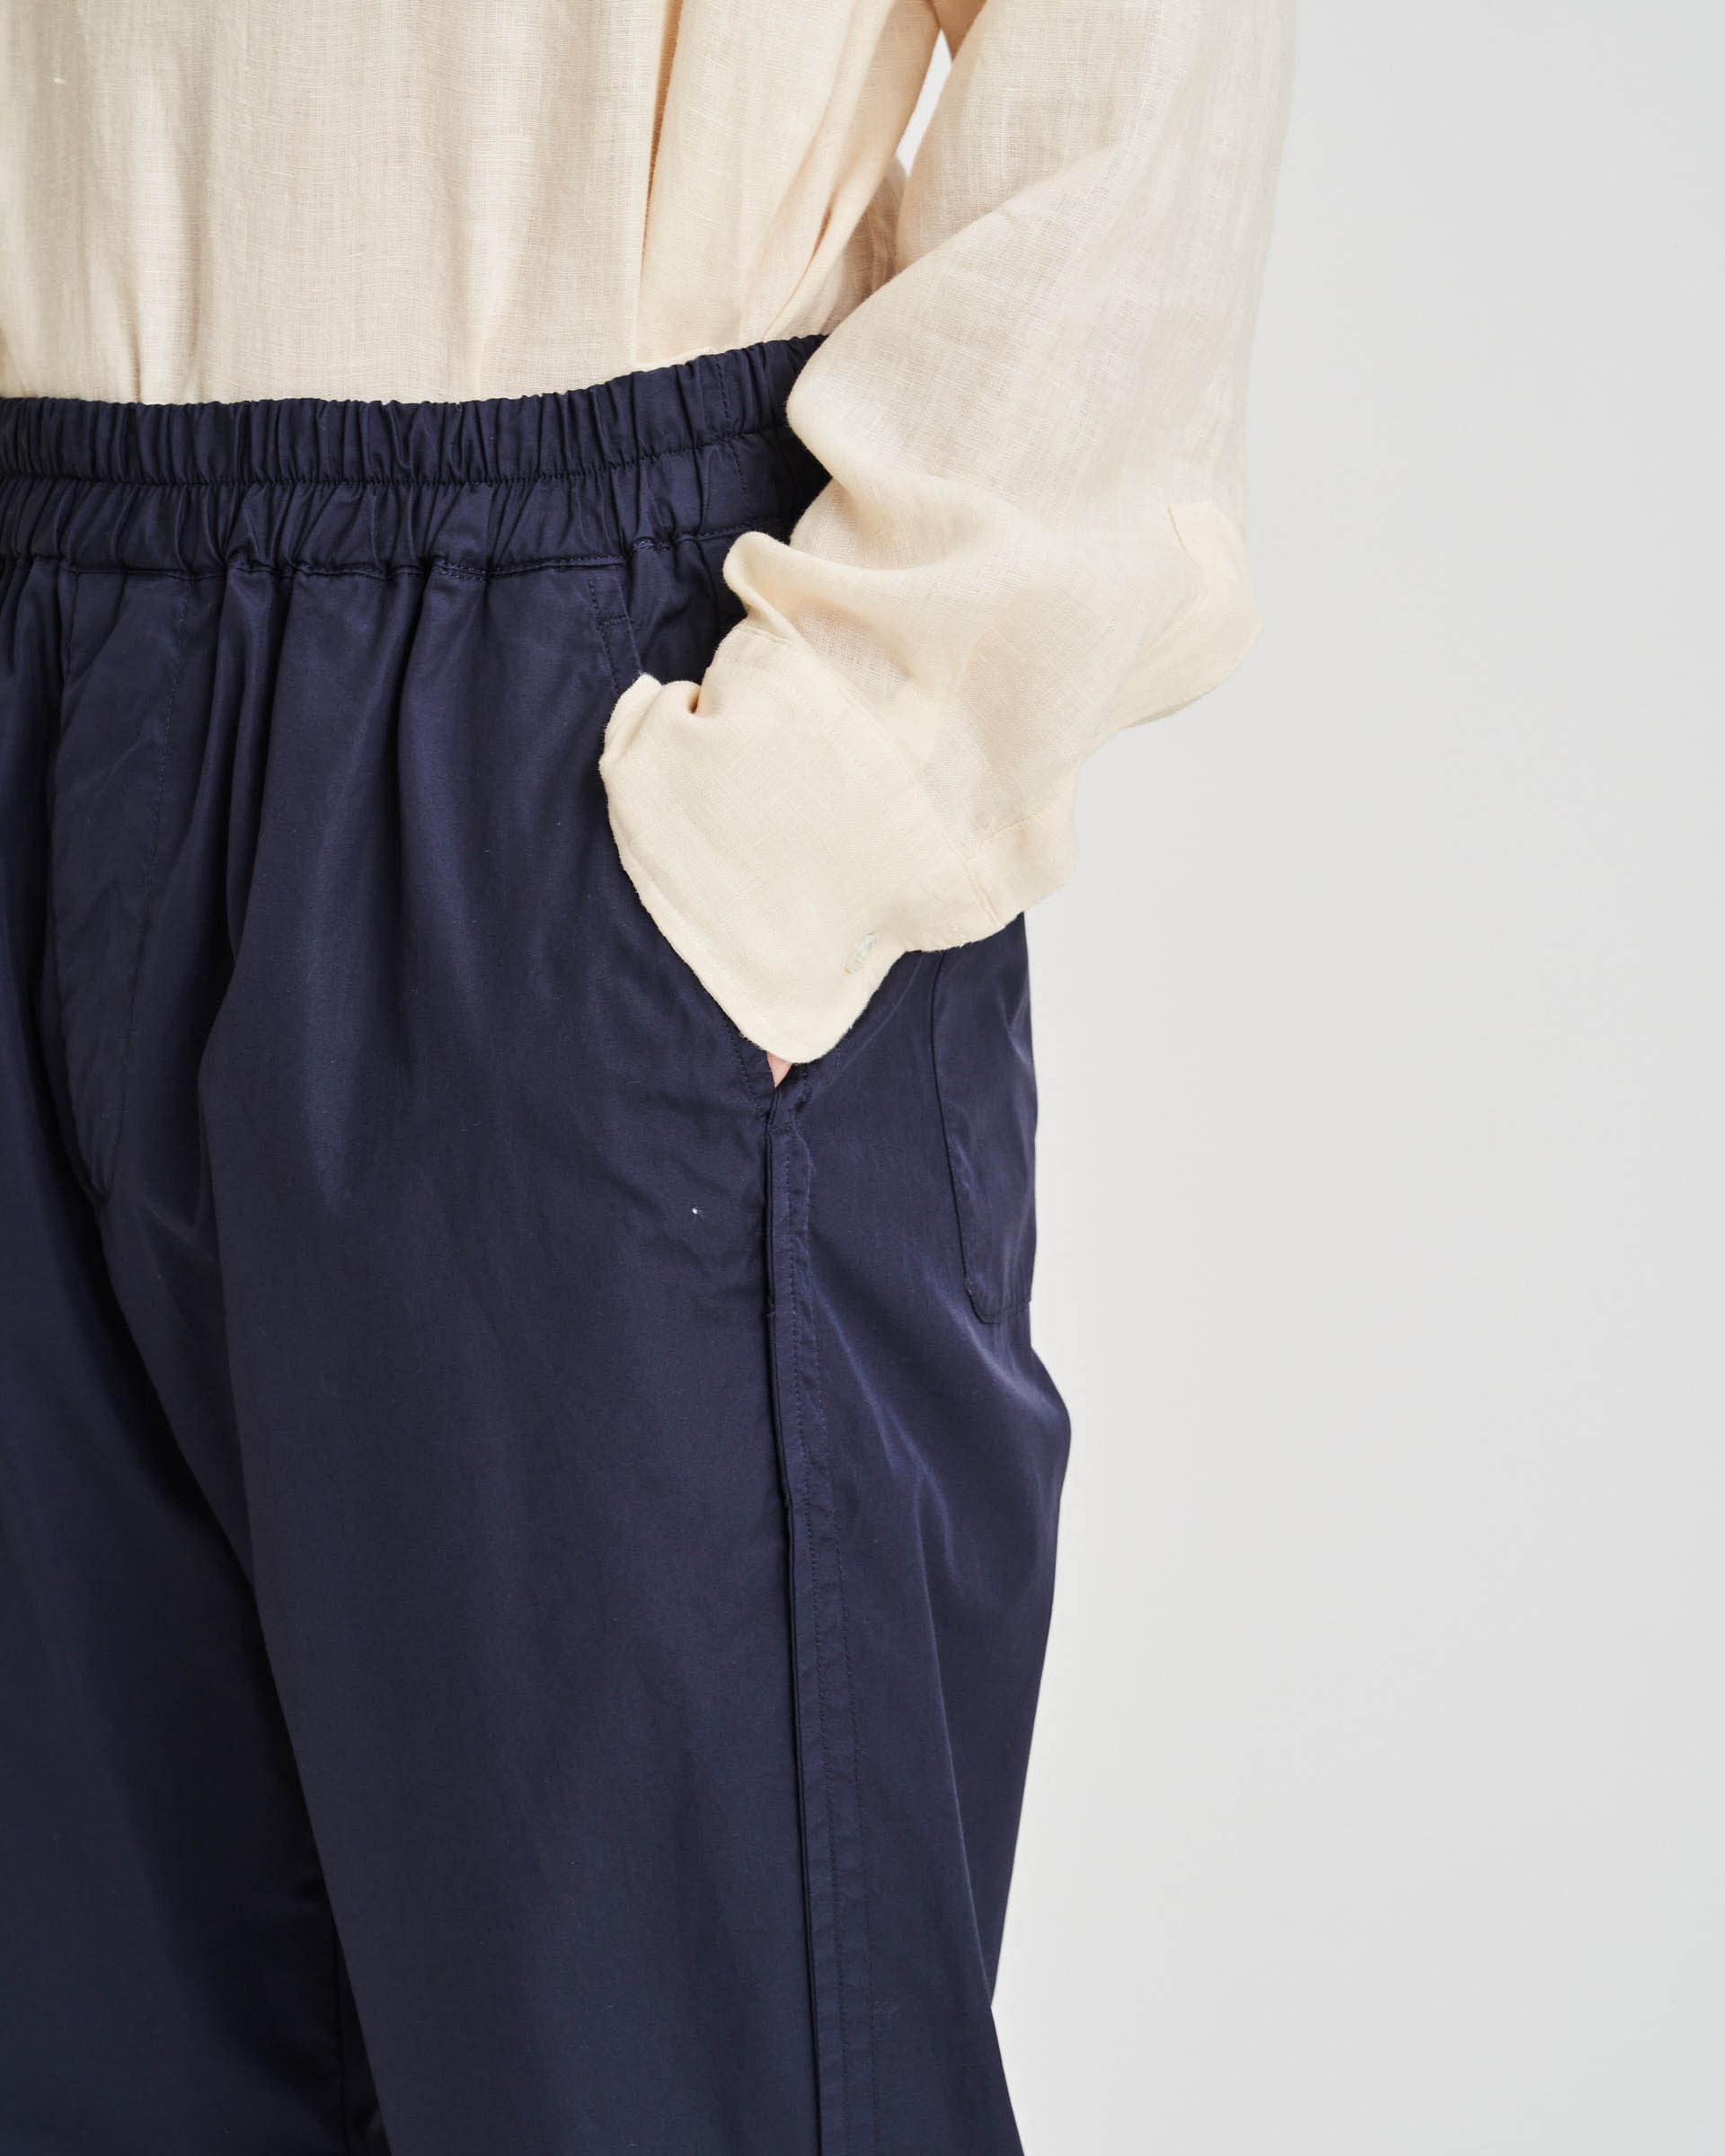 The Market Store | Pants With Elastic Waist